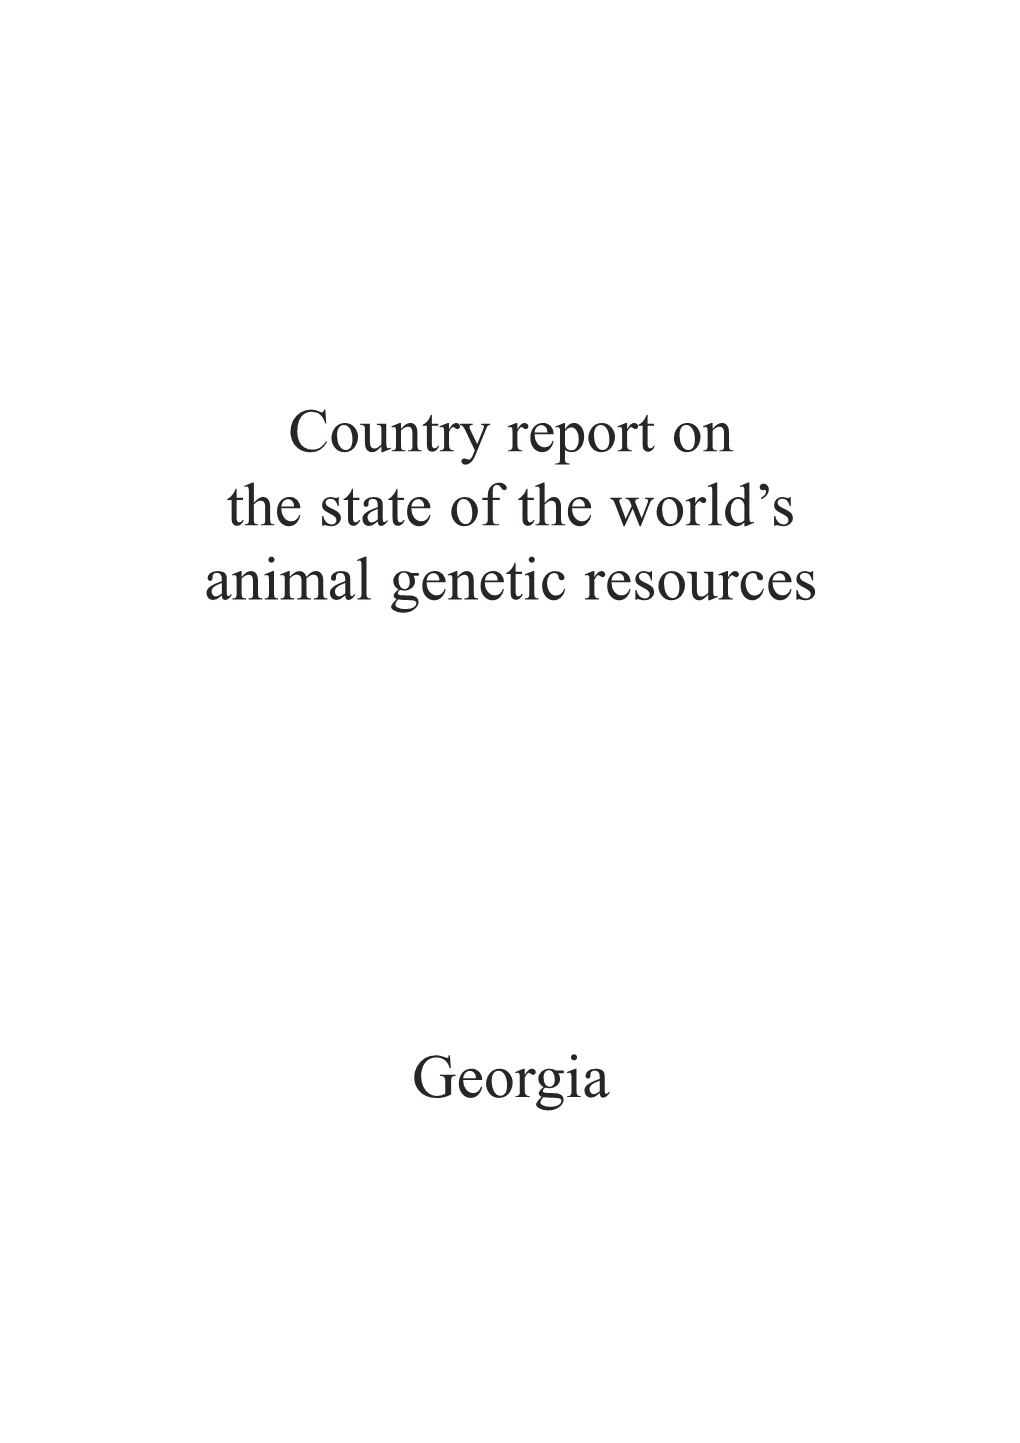 Country Report on the State of the World's Animal Genetic Resources